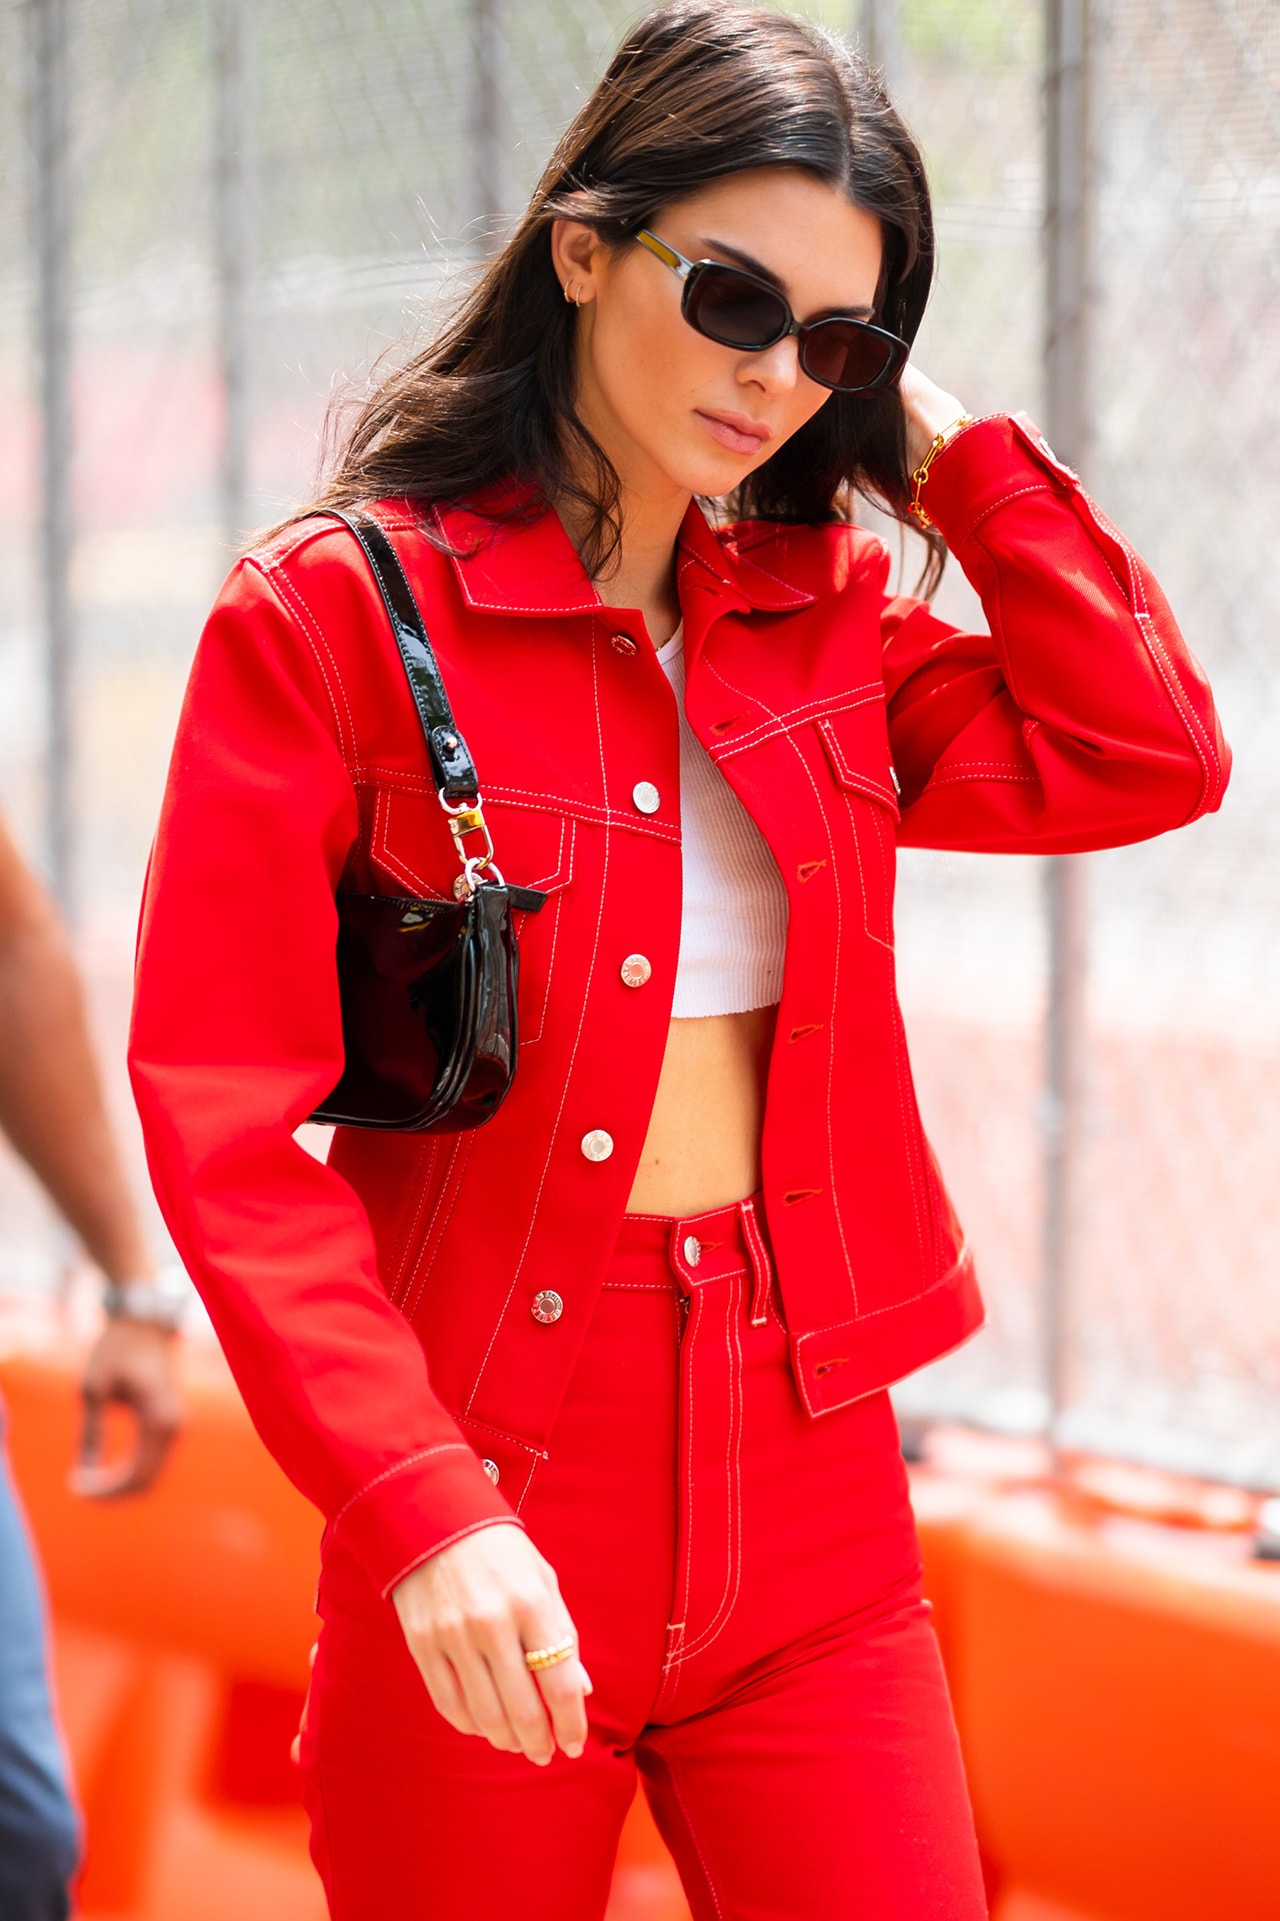 Kendall Jenner Mode Supermodel It Girl Off Duty Street Style Fashion Red Denim Jeans Jacket Black Vintage Bag Sunglasses Hairstyle Center Part Celebrity Thin Hair